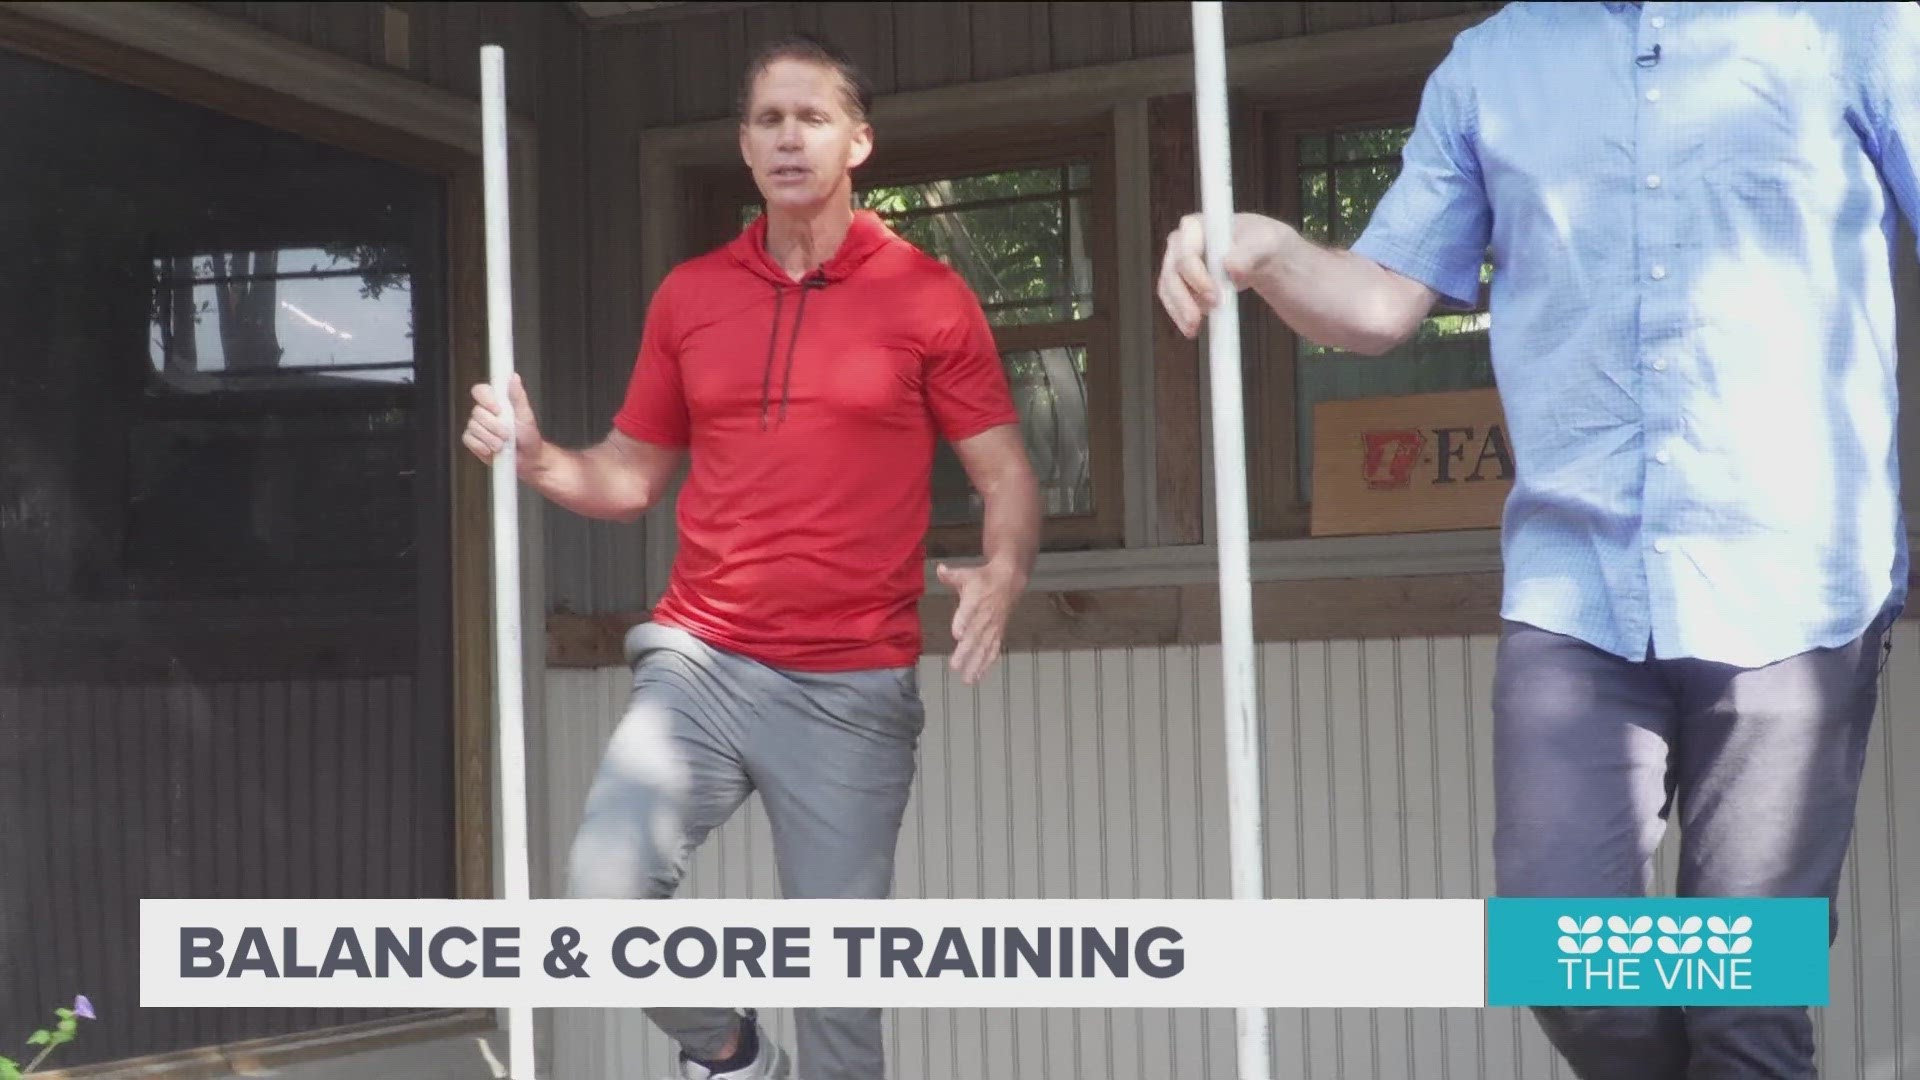 Fitness pro, Jeff McDaniels gives tips on ways to balance and tone the core using one piece of equipment.